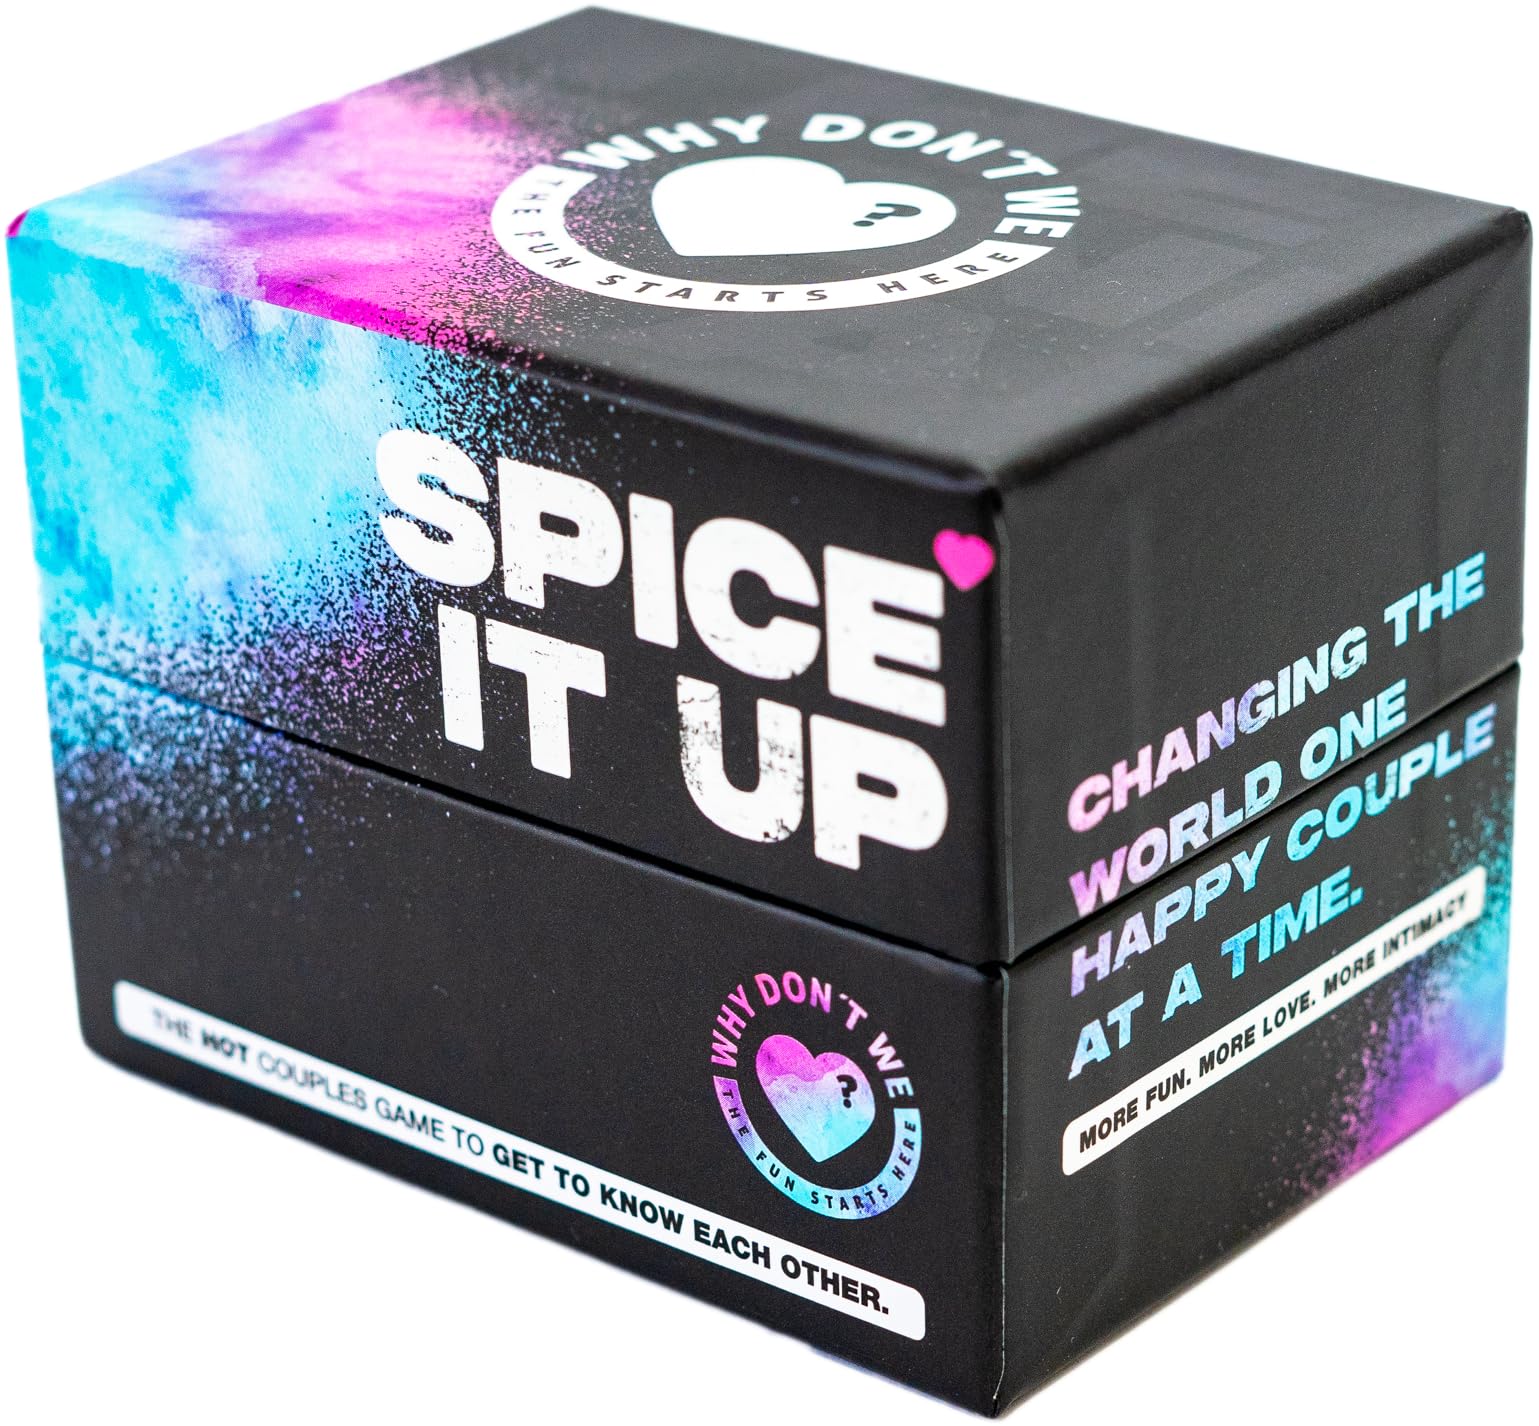 Spice IT UP by Why Don’t We. Spicy Couples Games for Adults with 150 Cards with Conversations, Spicy Dares & More - Best Date Night Games for Couples - Romantic Adult Couple Games